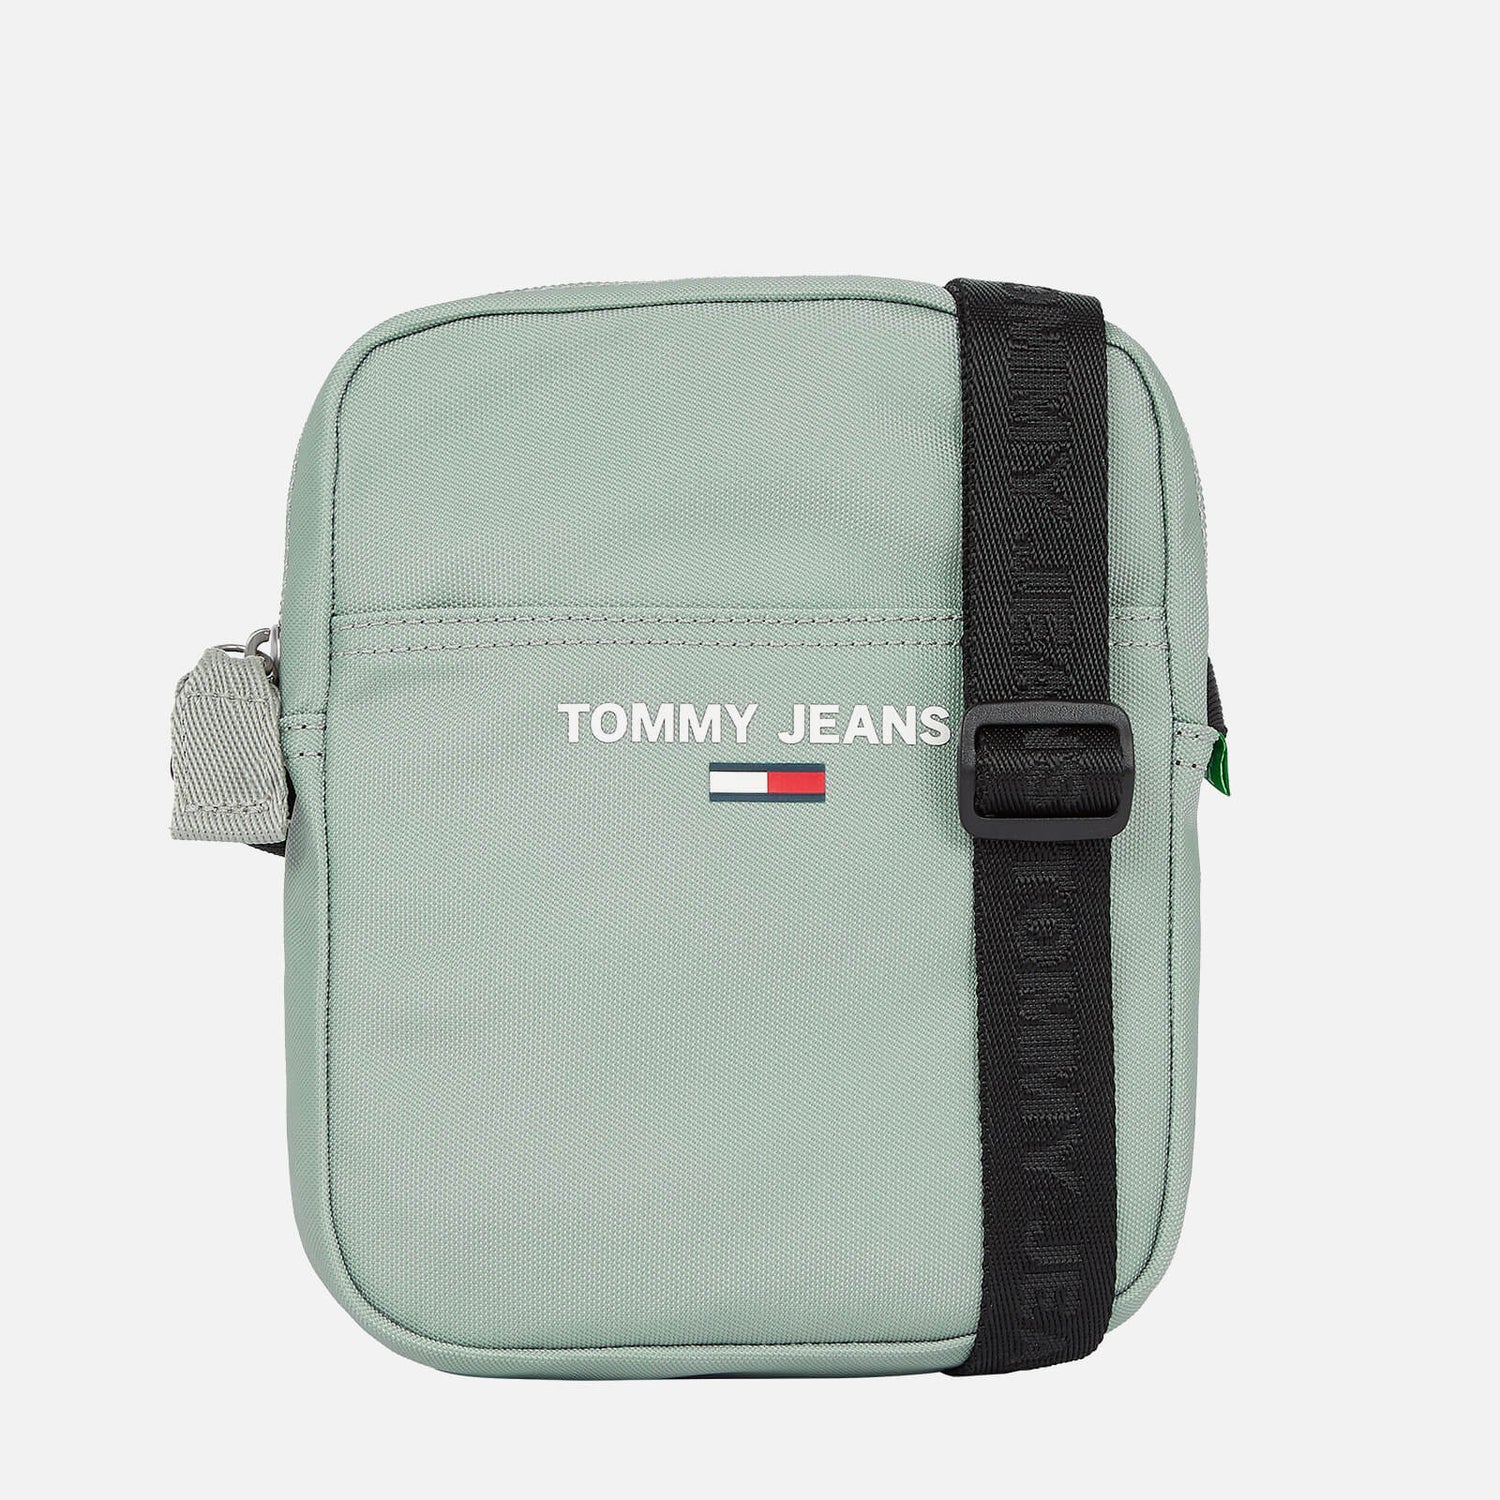 Tommy Jeans Men's Essential Reporter Bag - Faded Willow